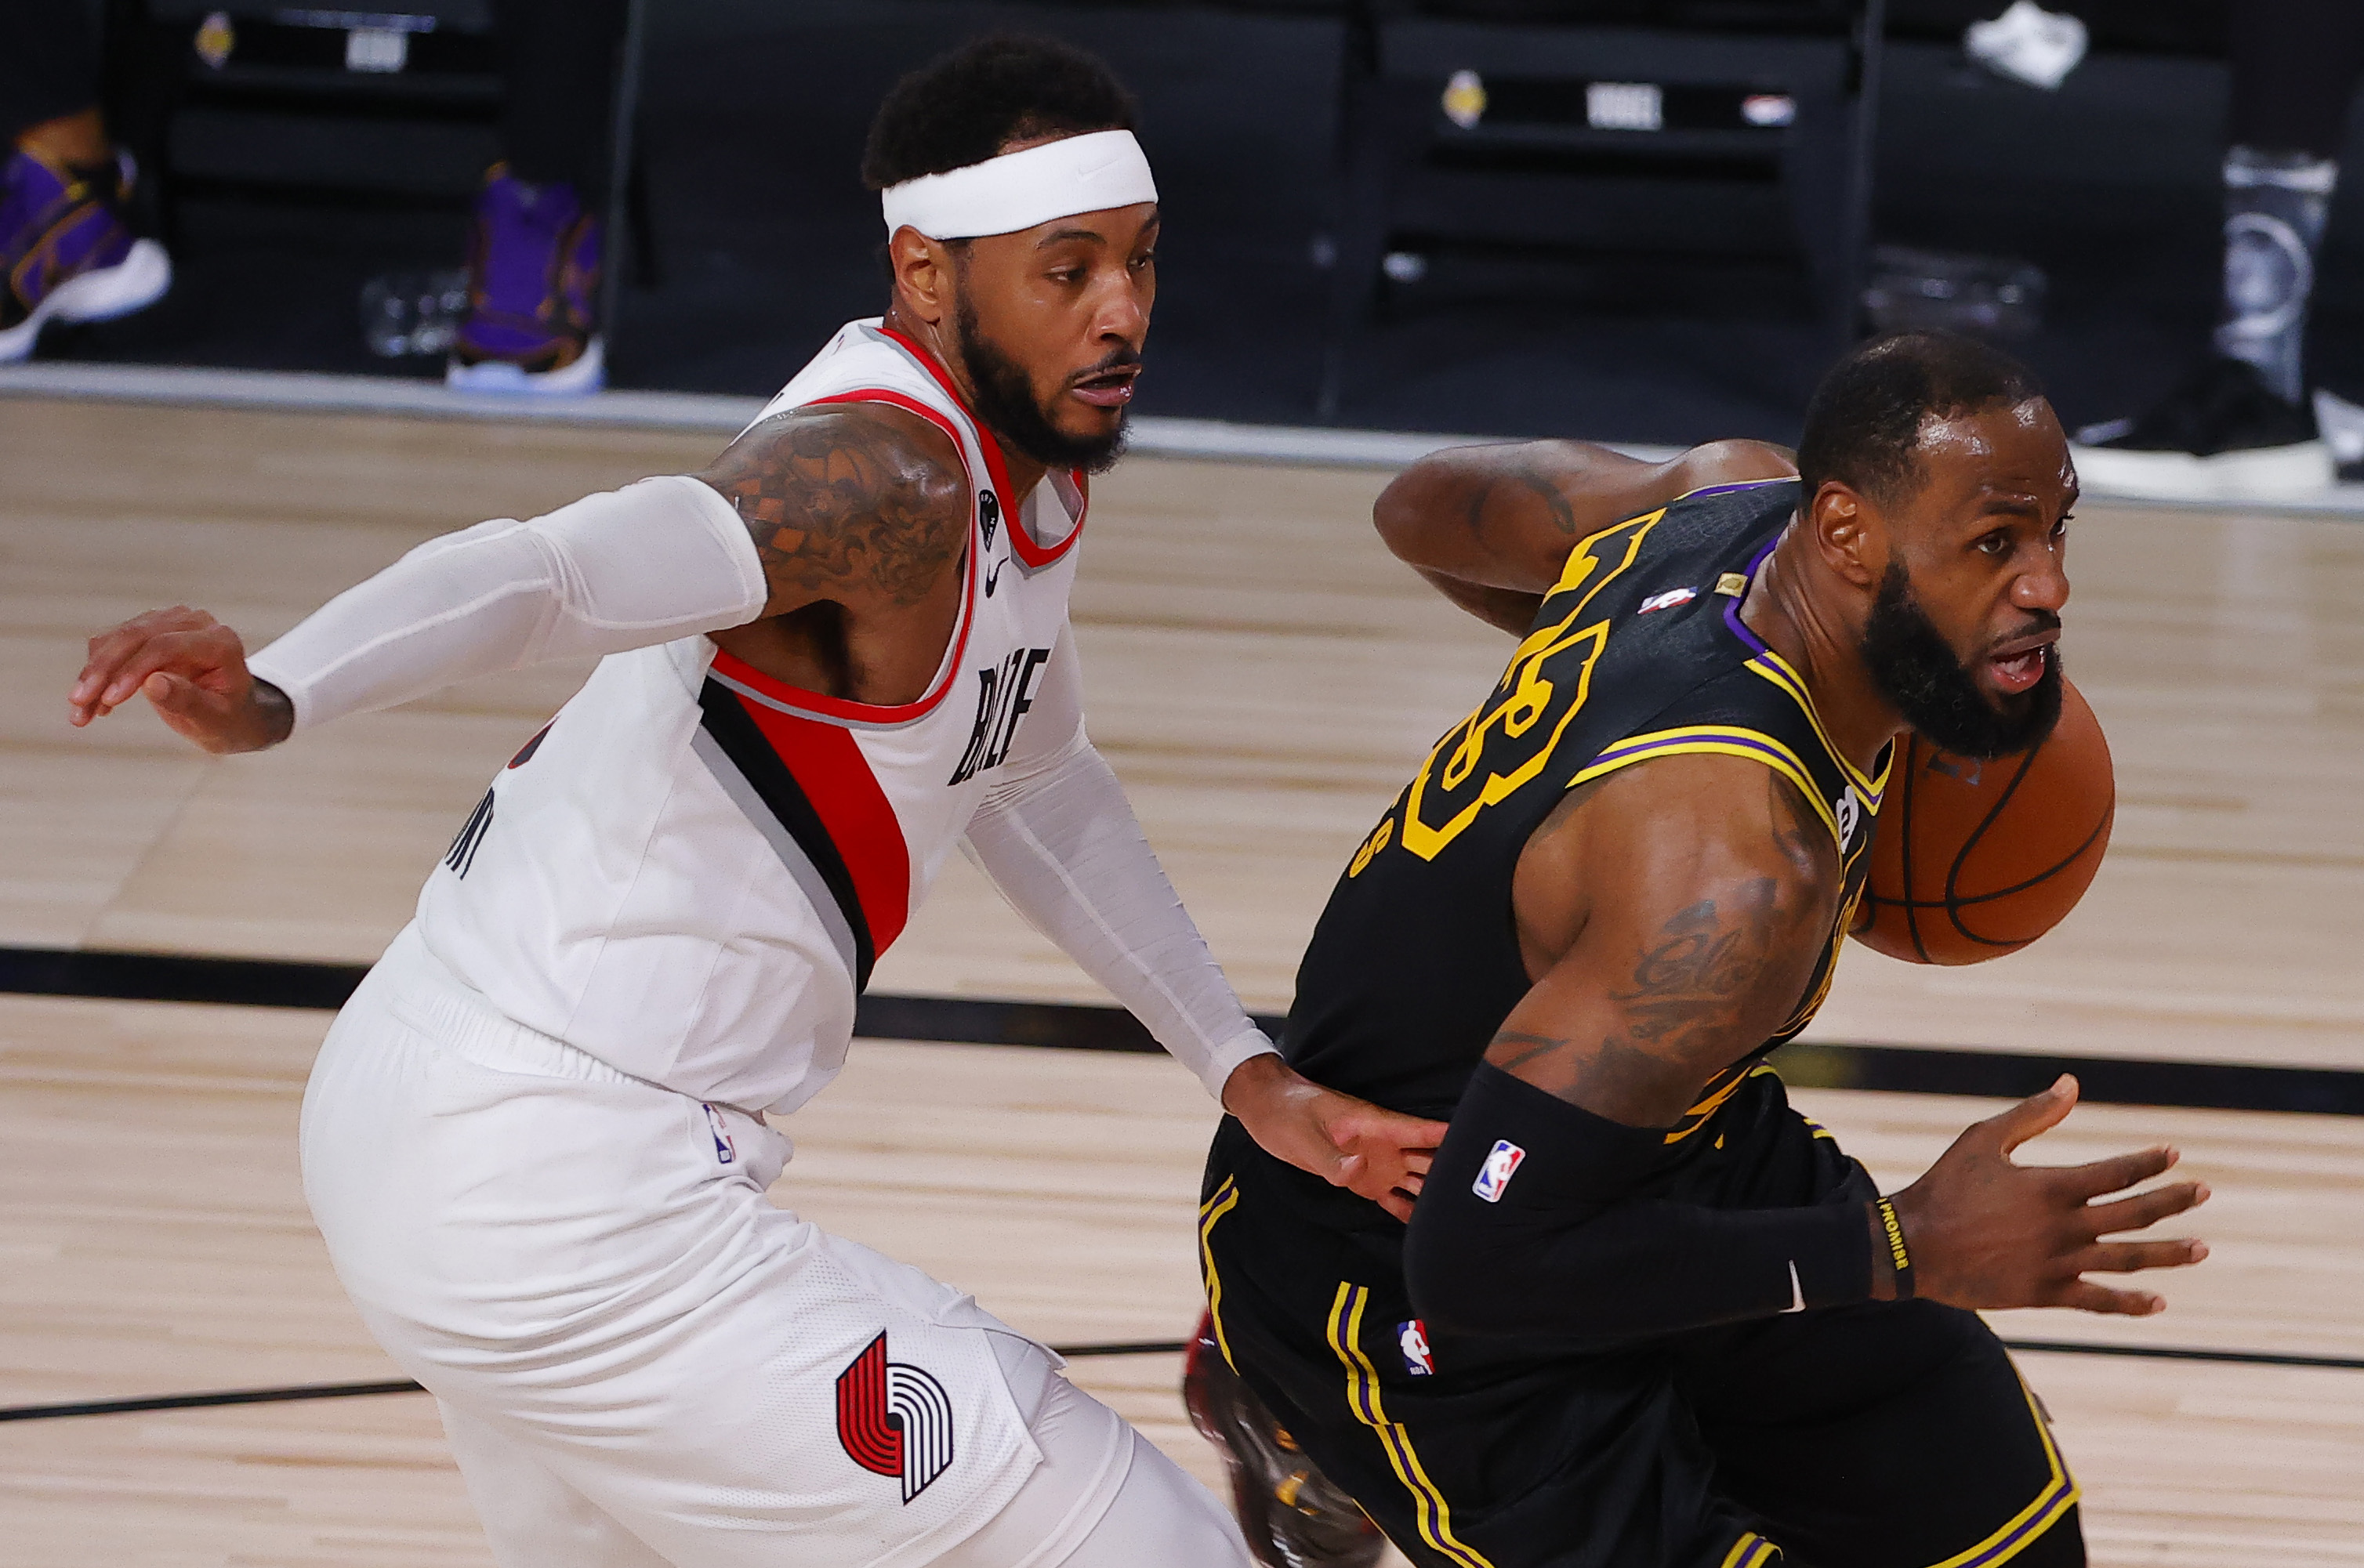 LeBron James shut it down to push Lakers to 3-1 lead over Blazers